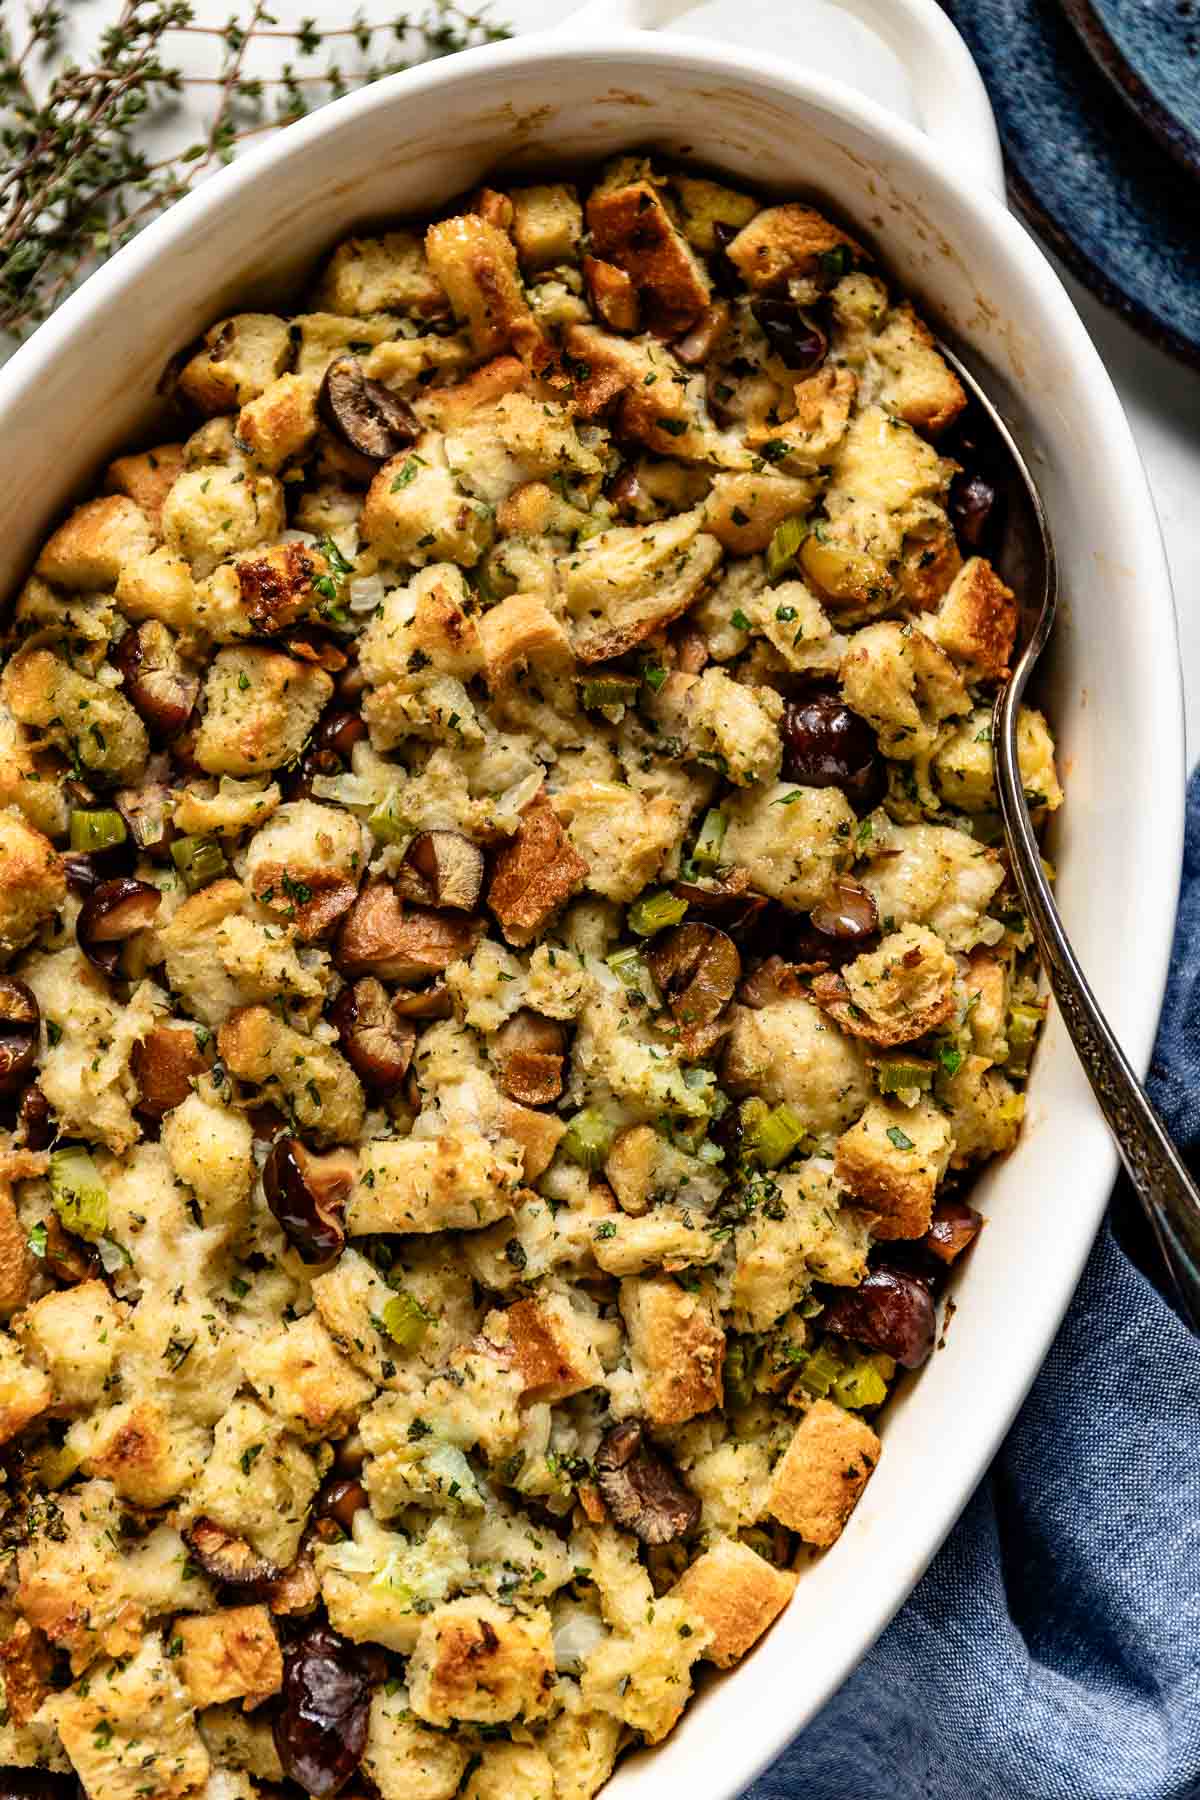 Chestnut stuffing in a casserole dish from the top view.